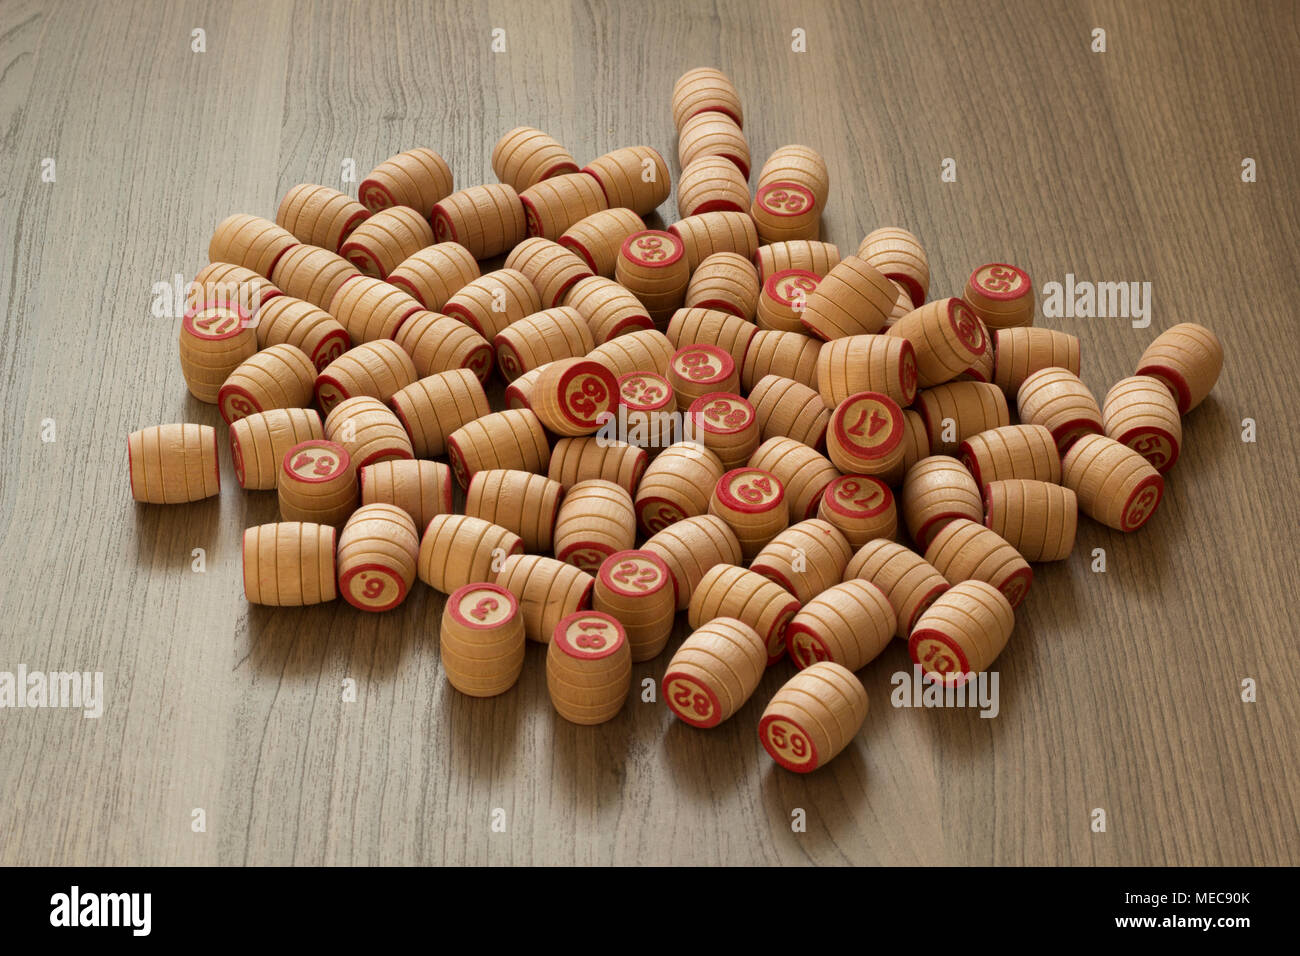 On a wooden table lie kegs of lotto without a bag Stock Photo